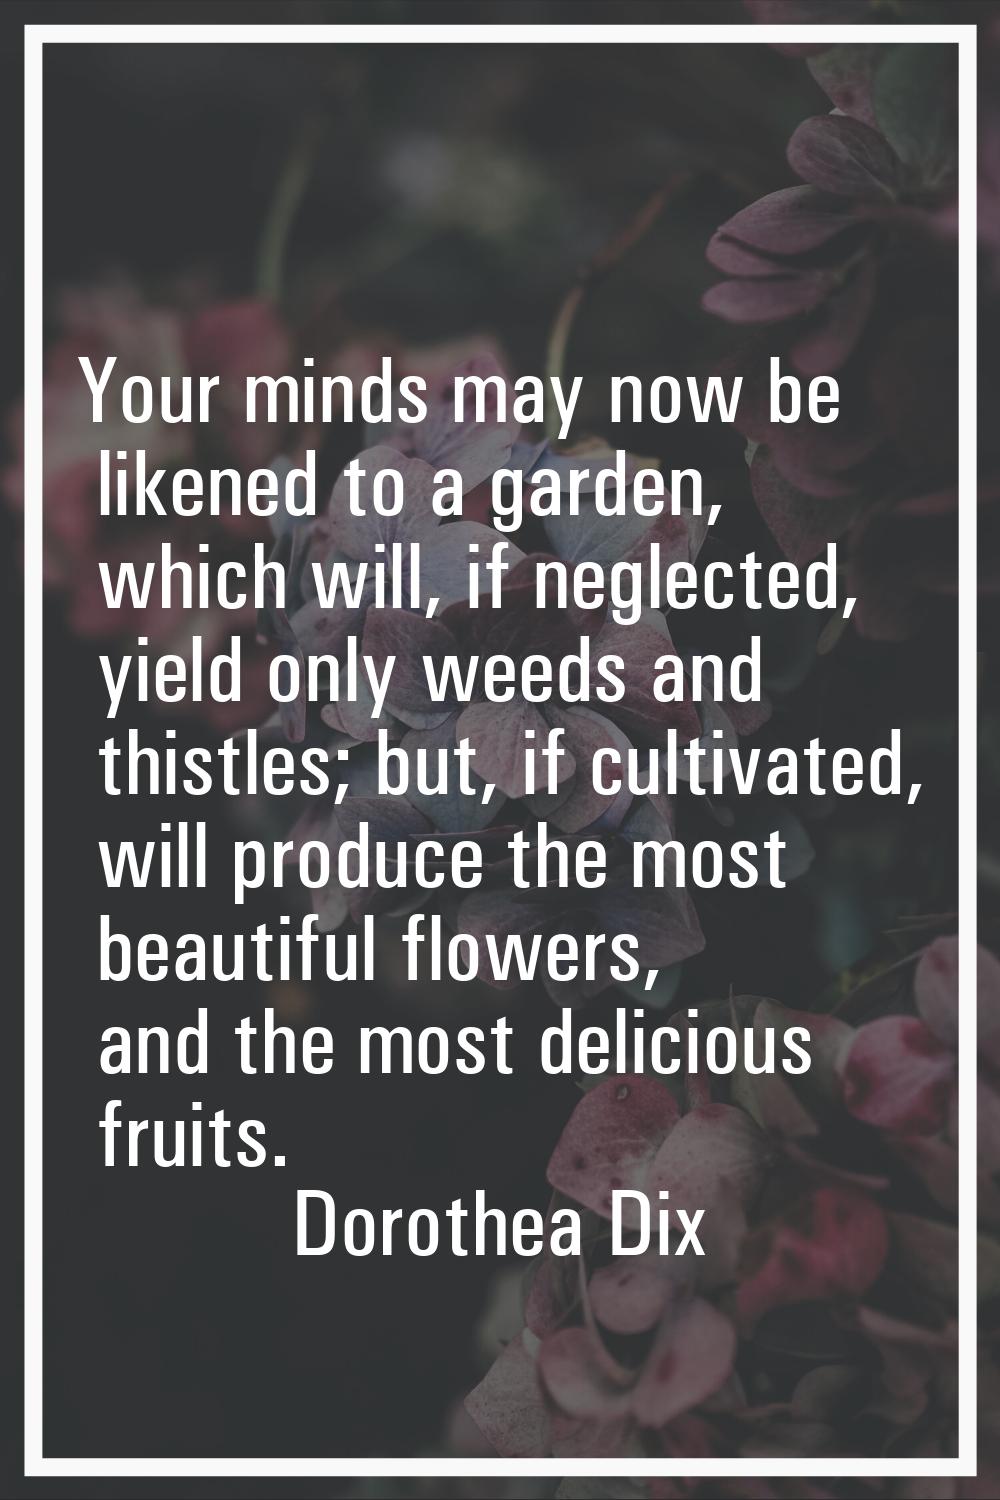 Your minds may now be likened to a garden, which will, if neglected, yield only weeds and thistles;